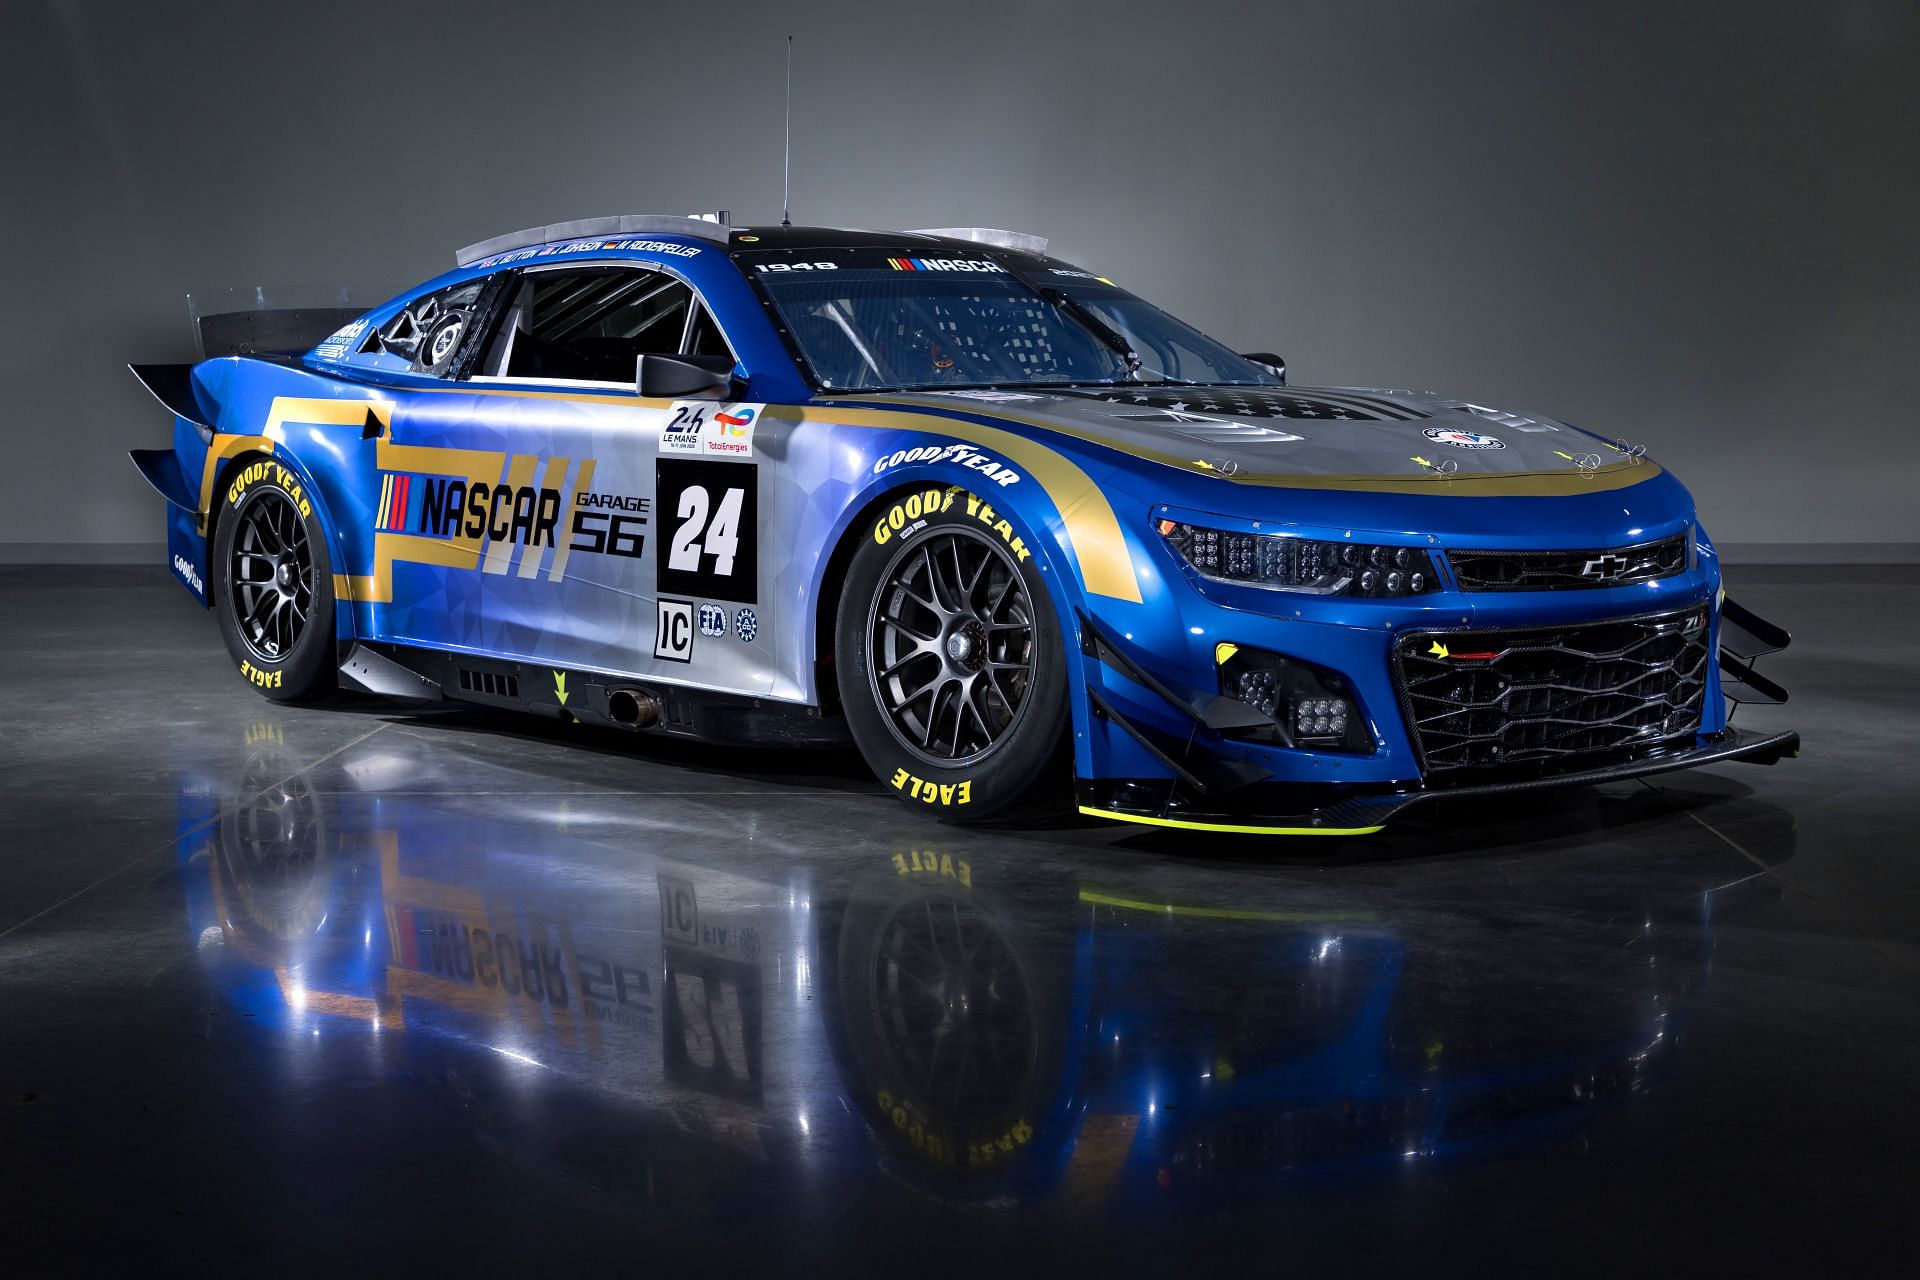 What class is the NASCAR Garage 56 car at Le Mans?